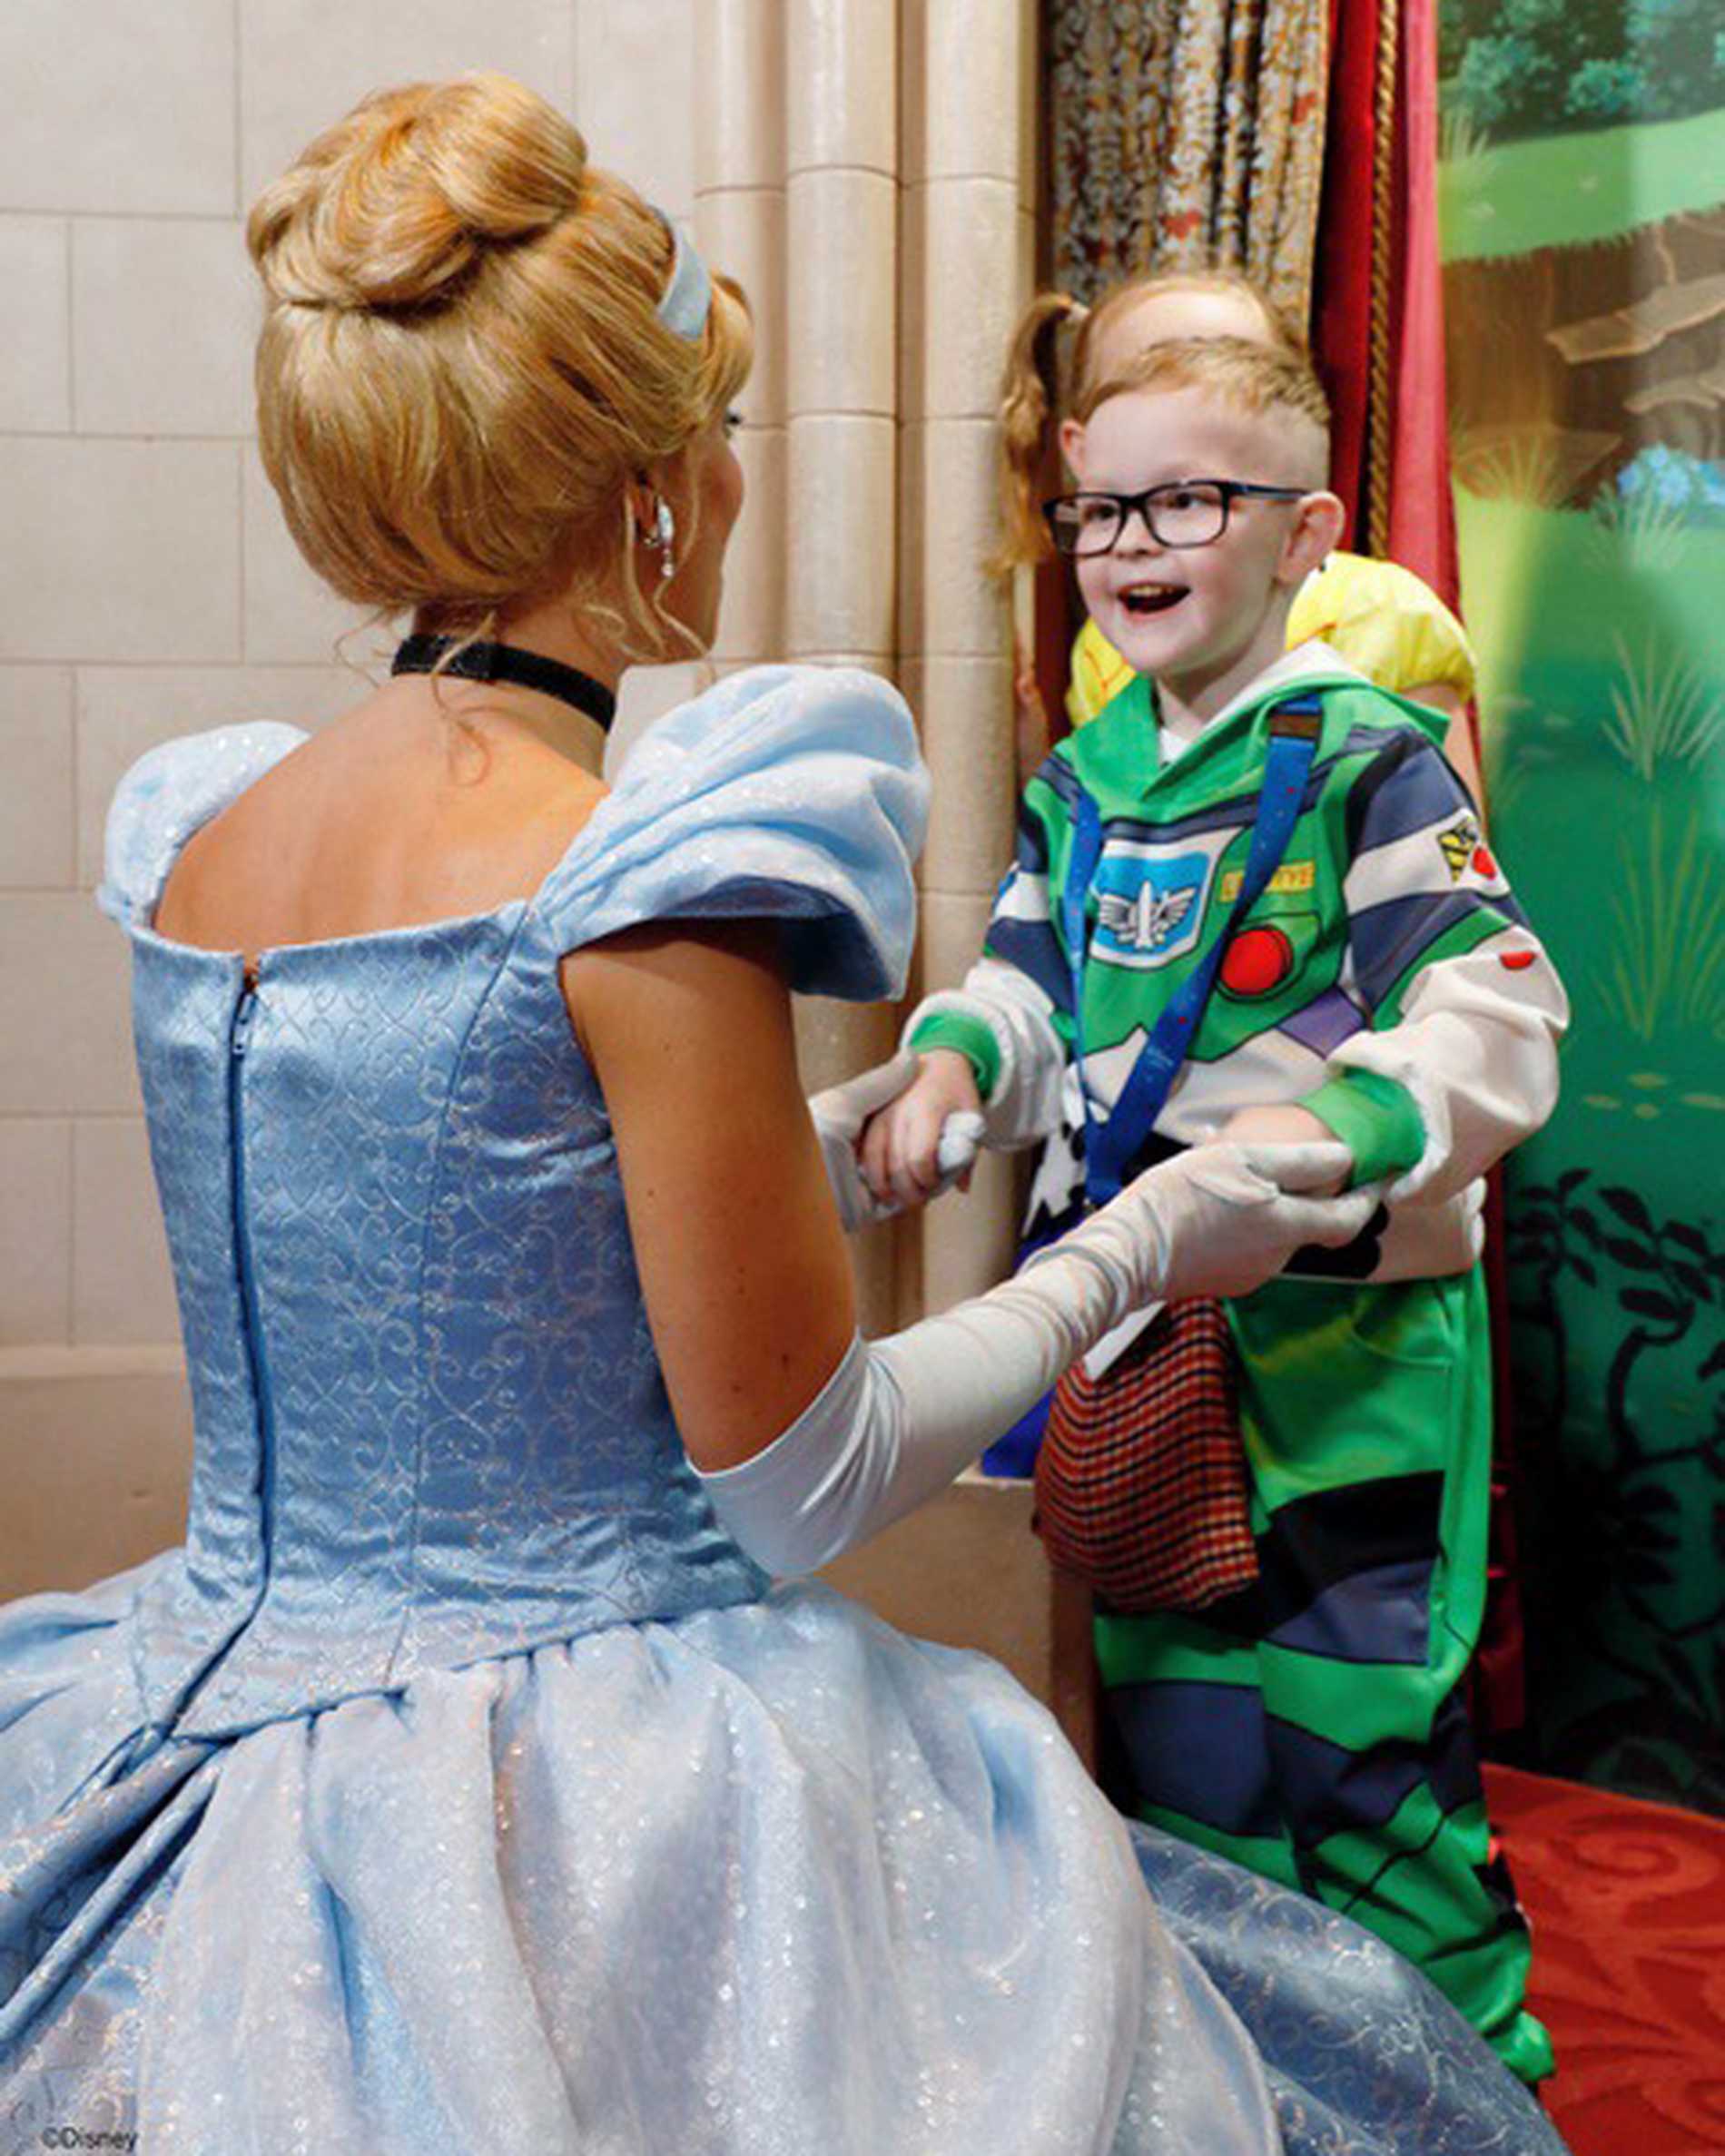 Patrick, dressed as Buzz Lightyear, with a big smile as he meets a Disney princess.